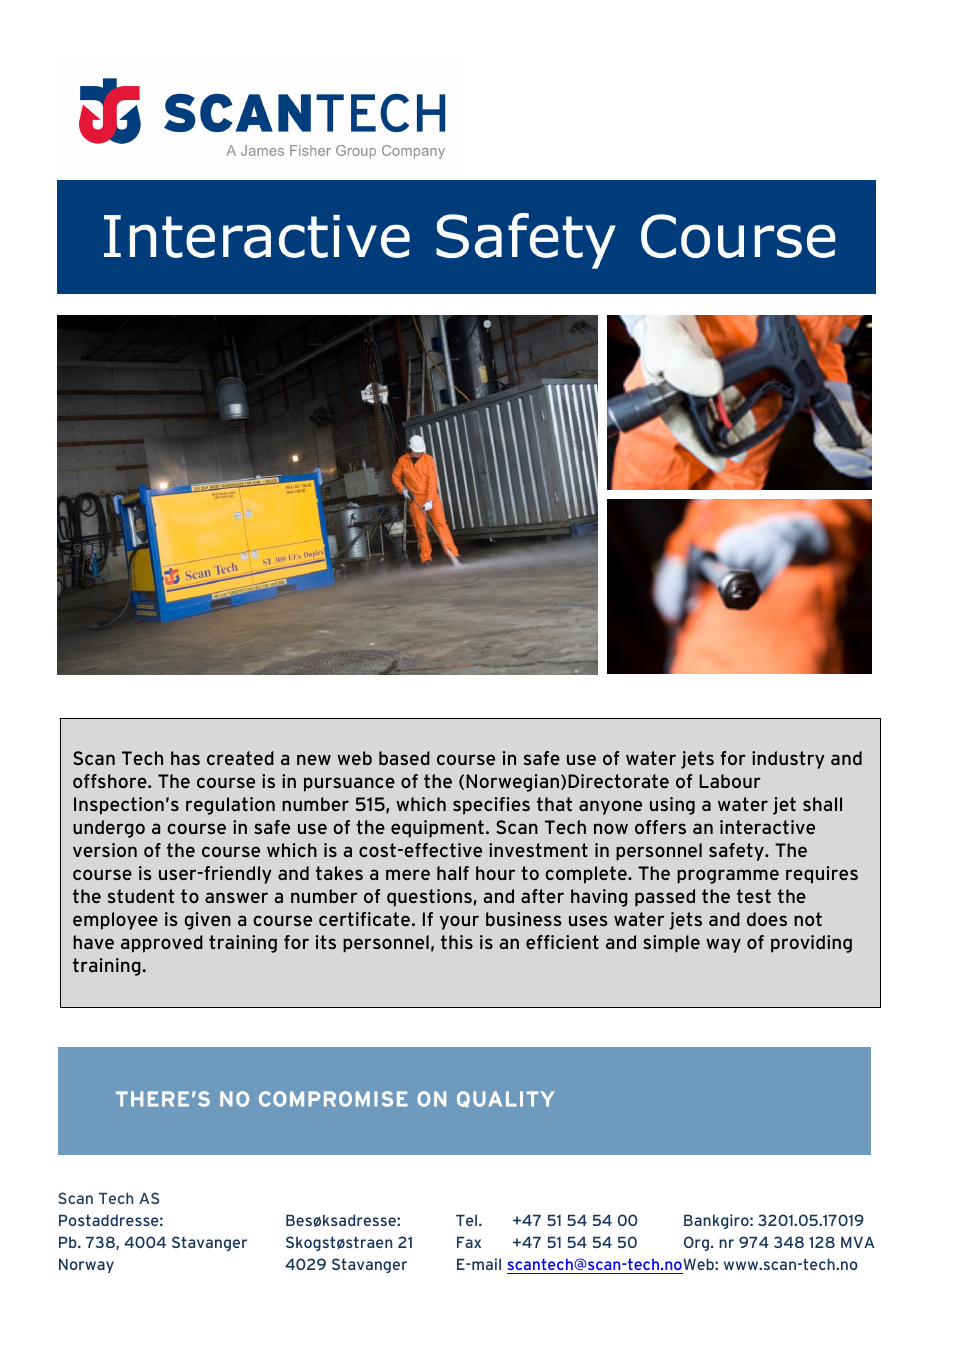 Interactive Safety course